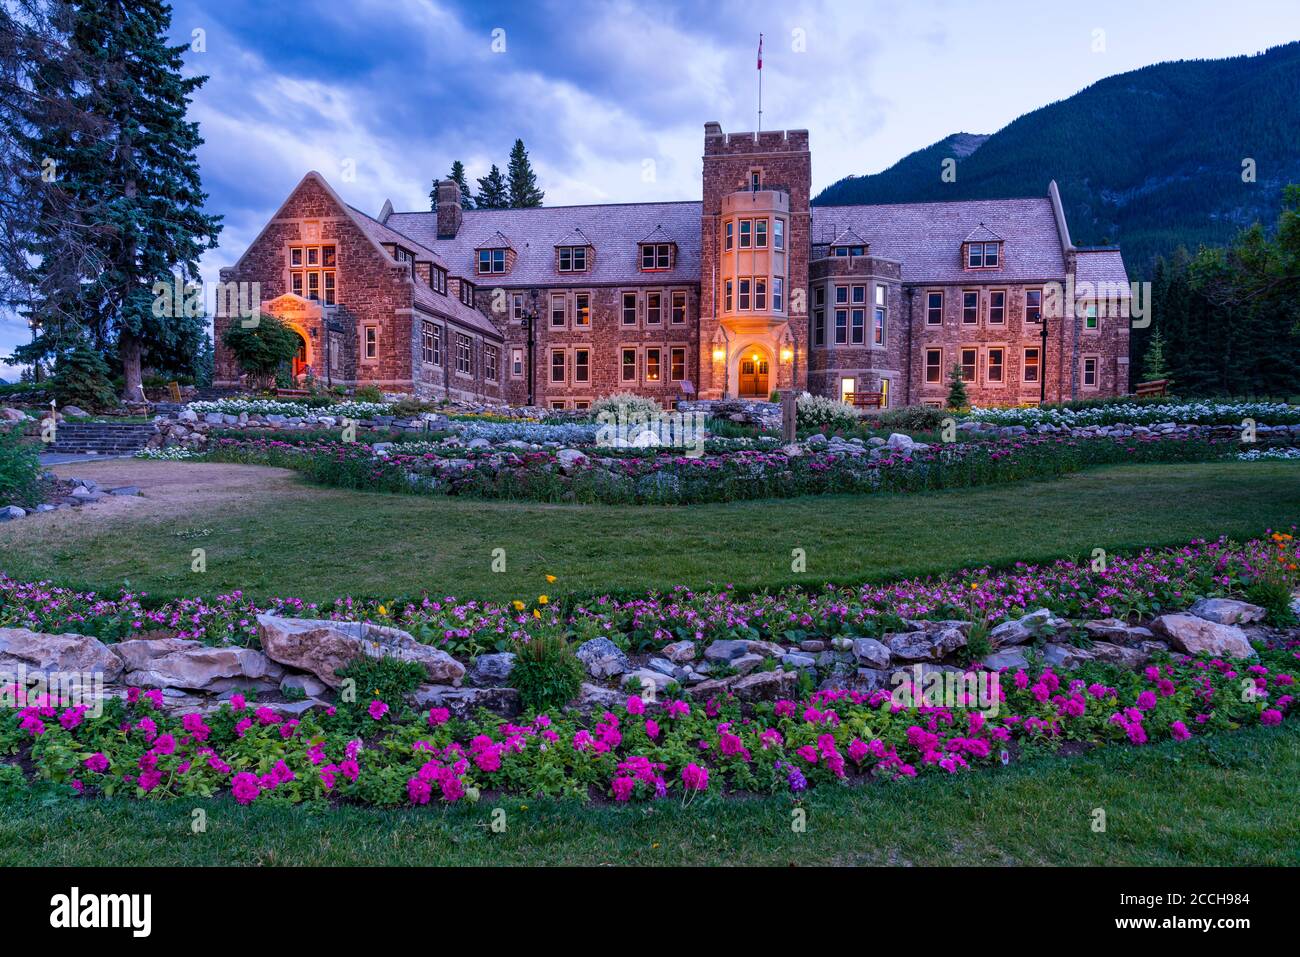 The Parks Canada administration building at night in the Banff townsite, Banff, Alberta, Canada. Stock Photo